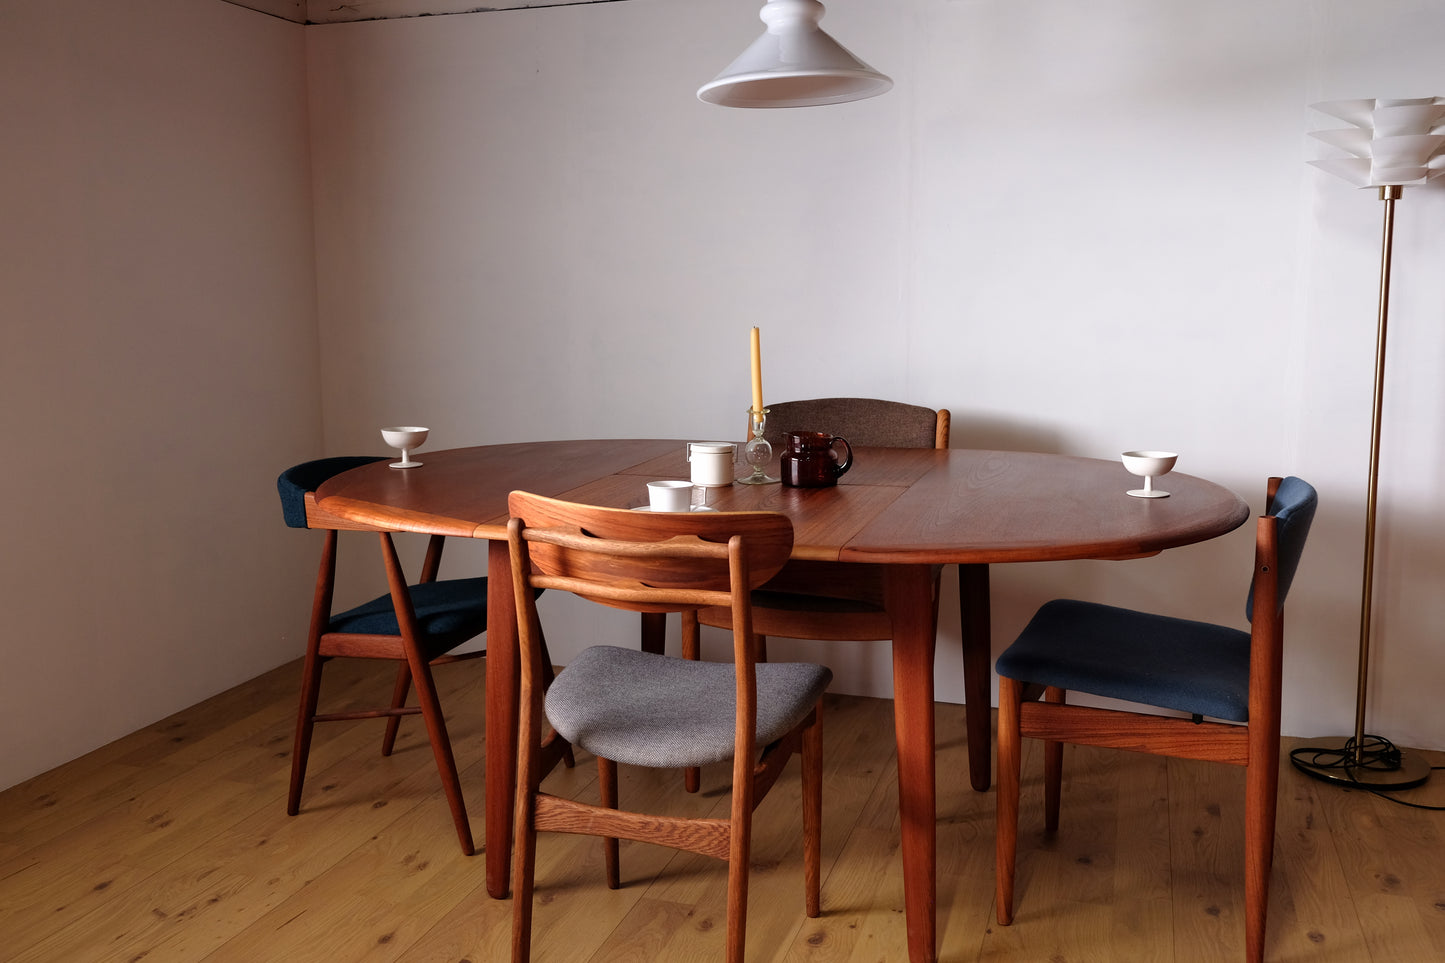 Svend Aage Madsen Round Dining table